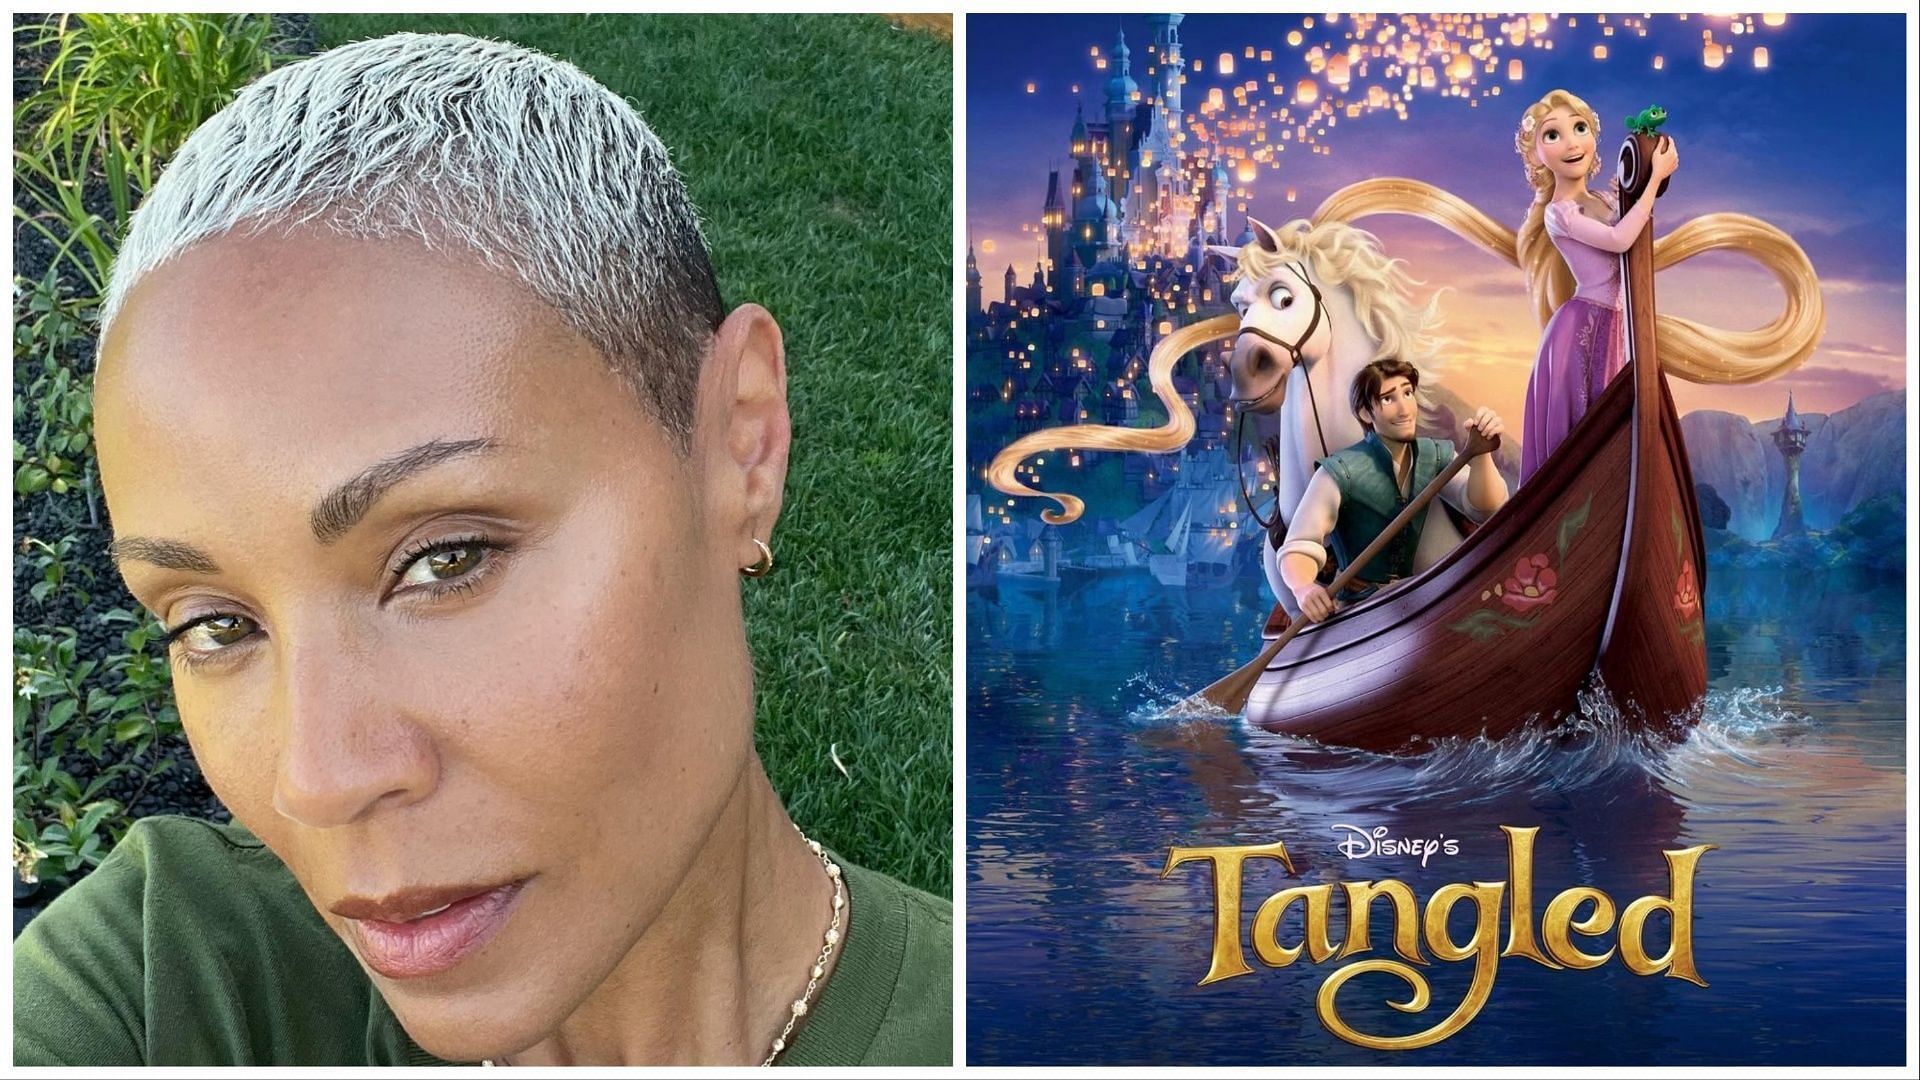 Pick A Live-Action Tangled Cast And I'll Judge If It's Good